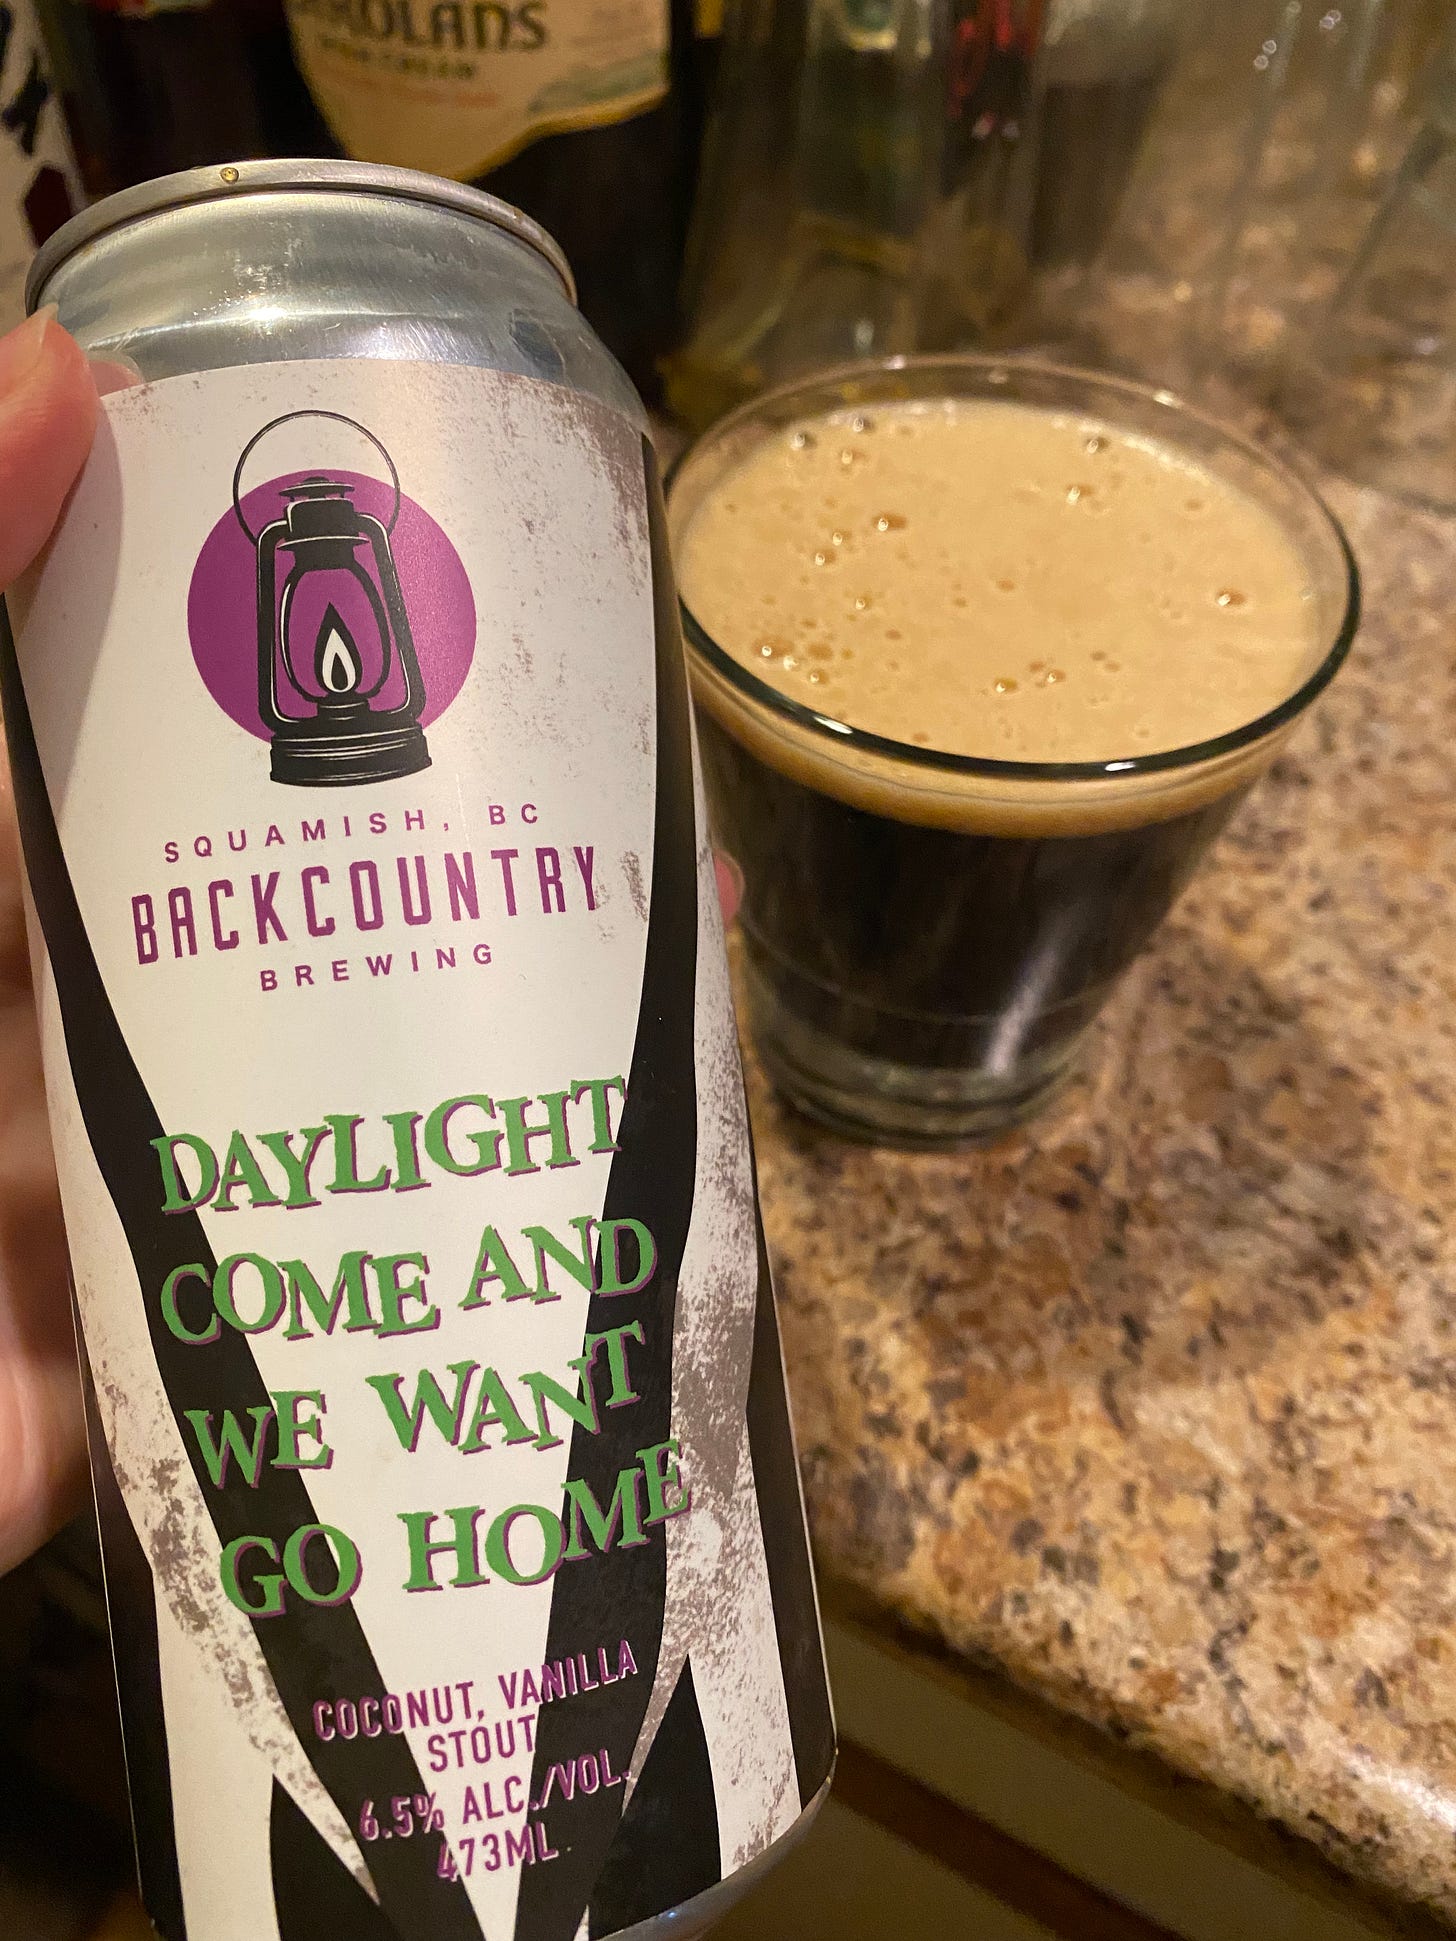 A white and black can of beer with purple and green text in the style of "Beetlejuice", reading "Daylight come and we want go home". In the background behind the can is a glass of dark beer with a light brown foam on top.